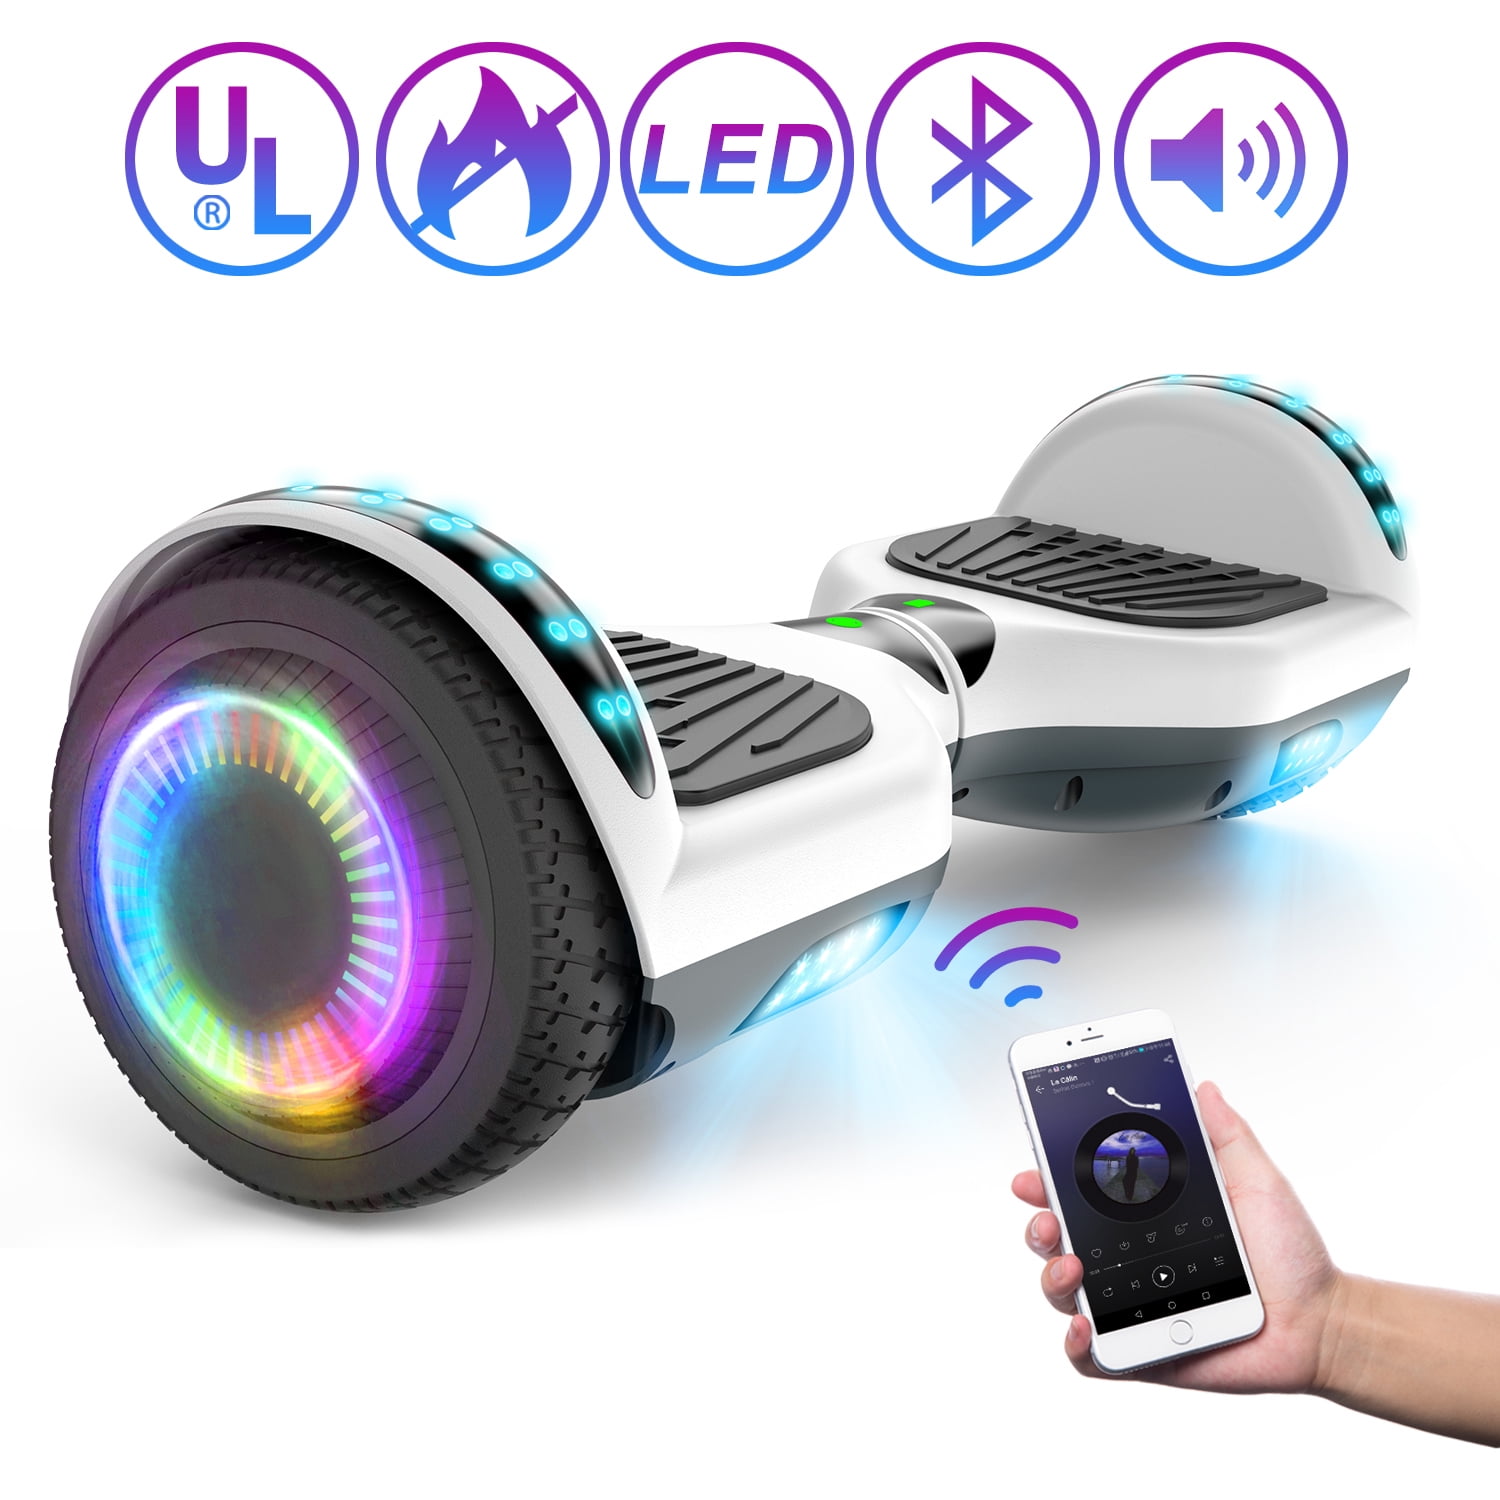 jolege 6.5 Hoverboard Self Balancing Hoverboard for Kids Adults Metallic Chrome with Bluetooth Speaker and LED Light 